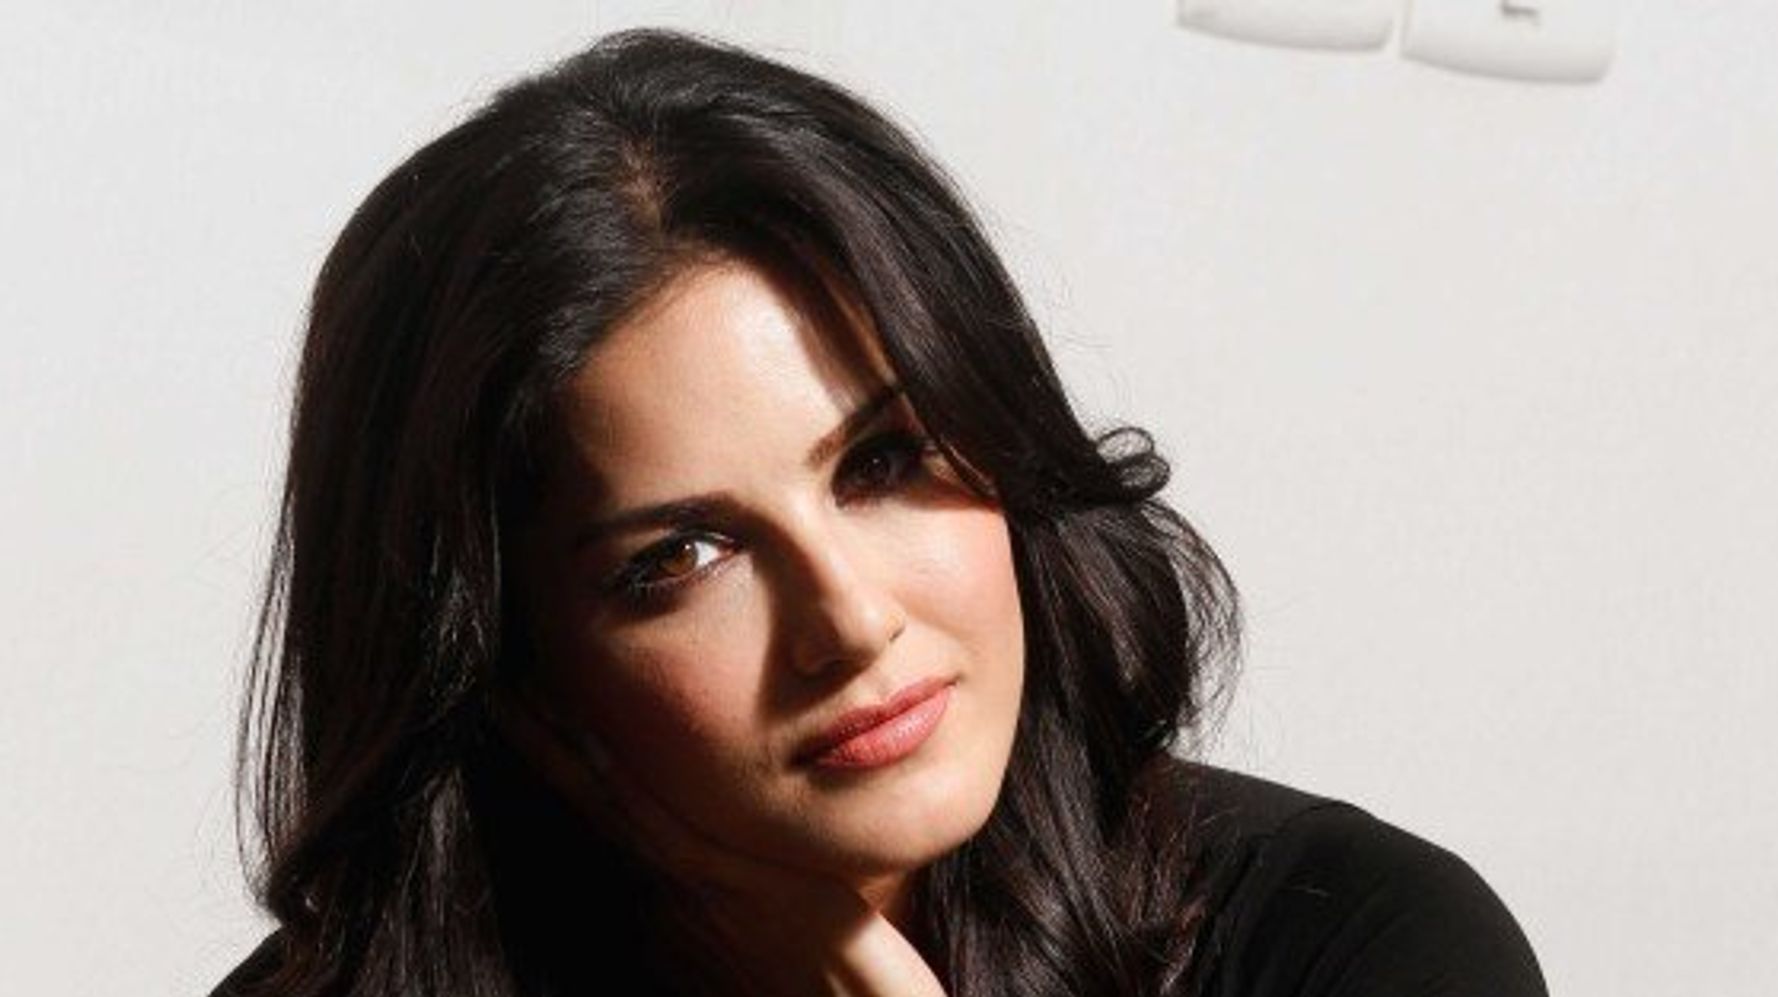 Www Sani Loun Xxx Com - Sunny Leone's Movies Are Tanking At The Box-Office And She Has No Idea Why  | HuffPost News